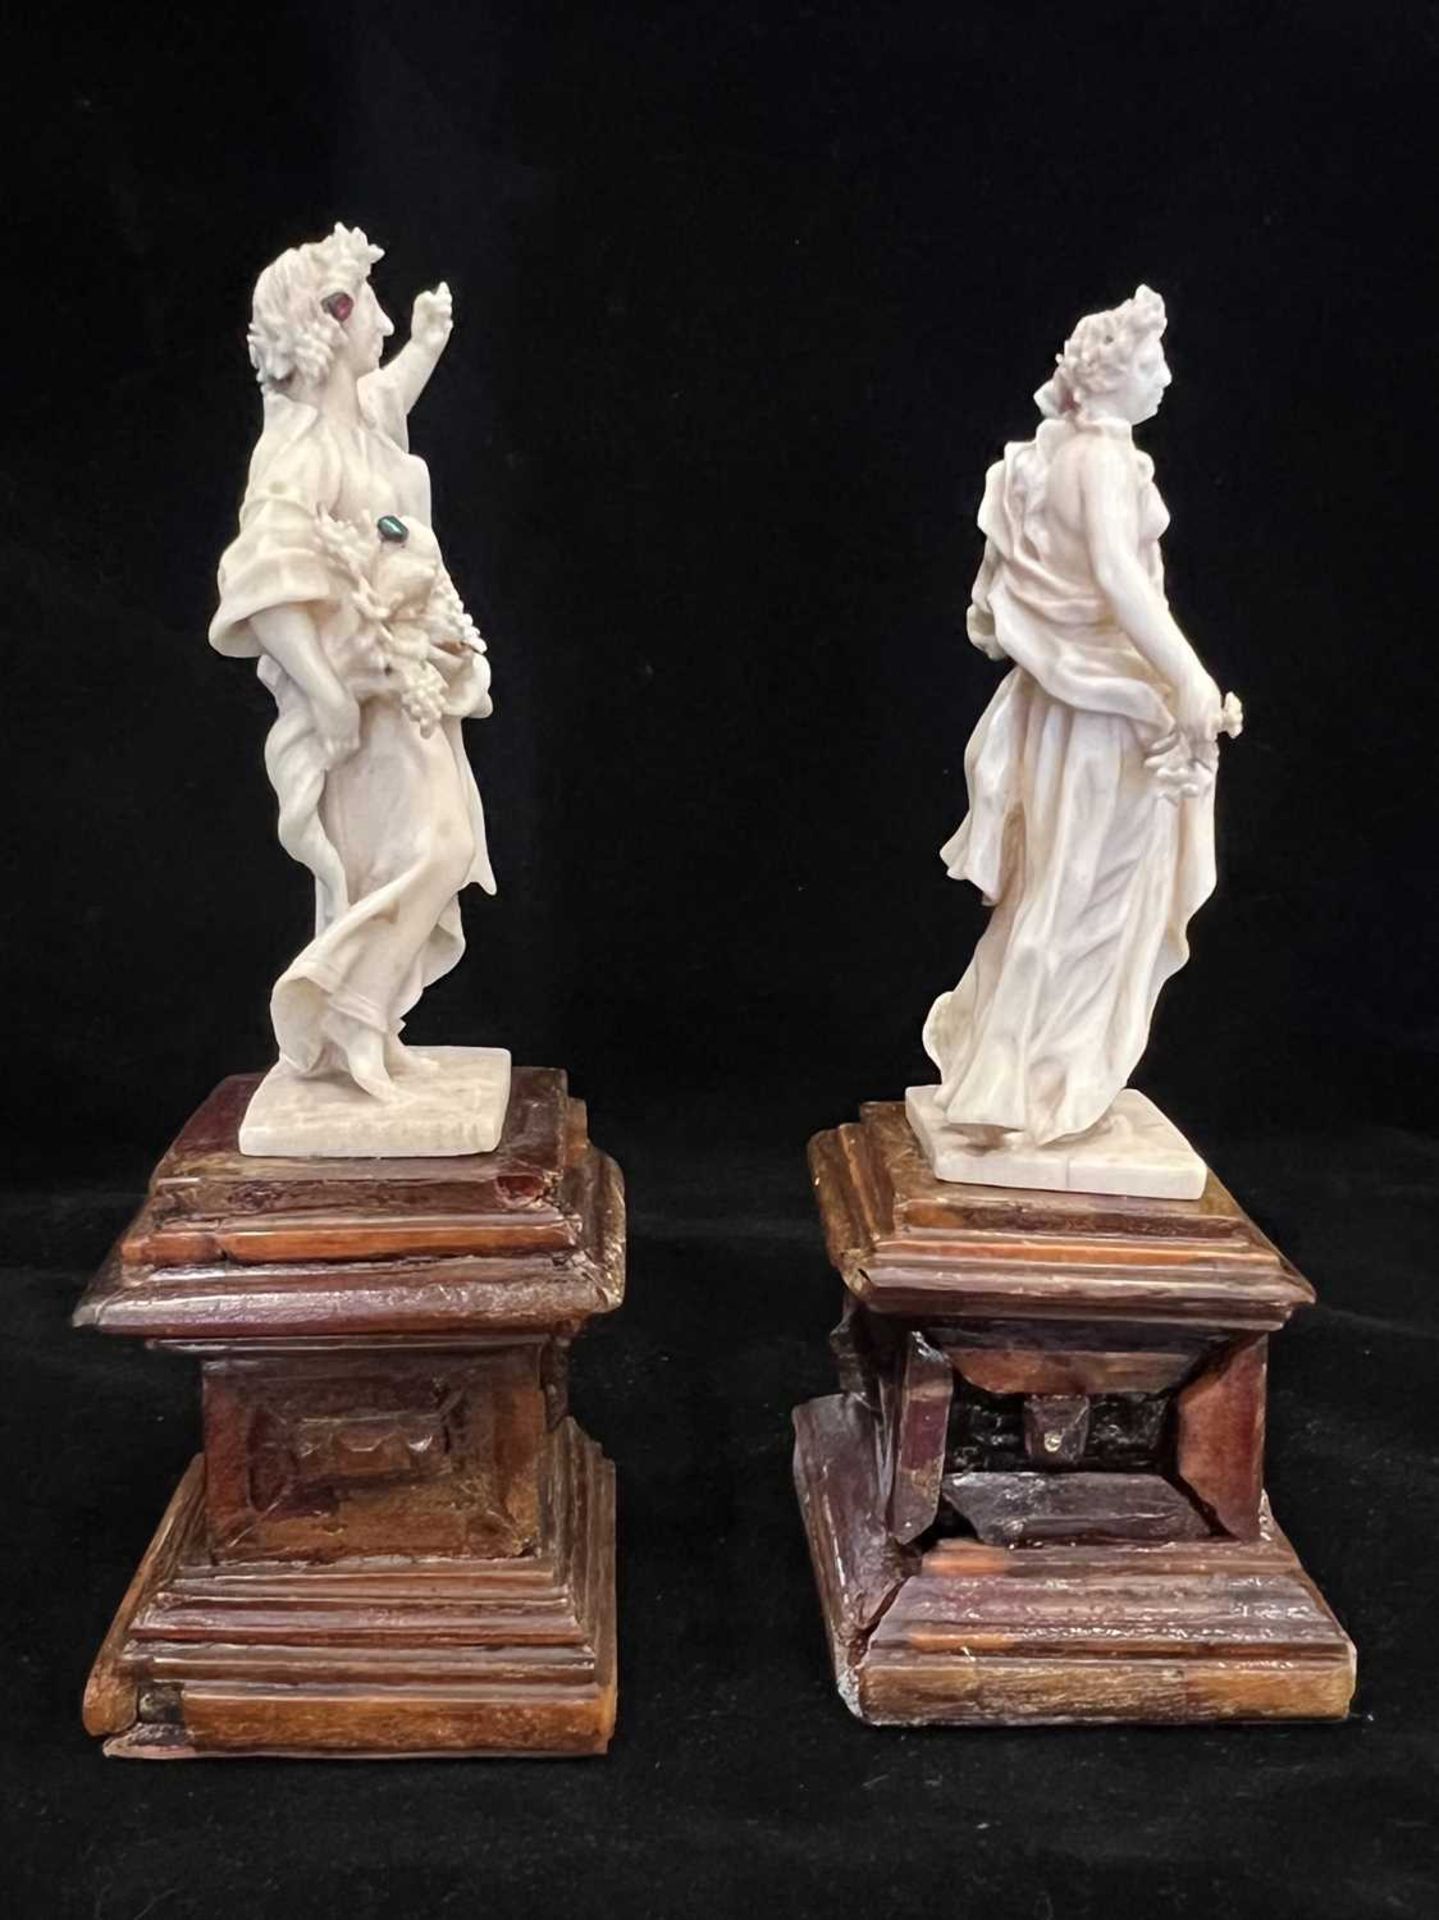 H.R.H PRINCESS MARGARET'S WEDDING GIFT: A PAIR OF 18TH CENTURY IVORY FIGURES OF SPRING AND AUTUMN - Image 11 of 14